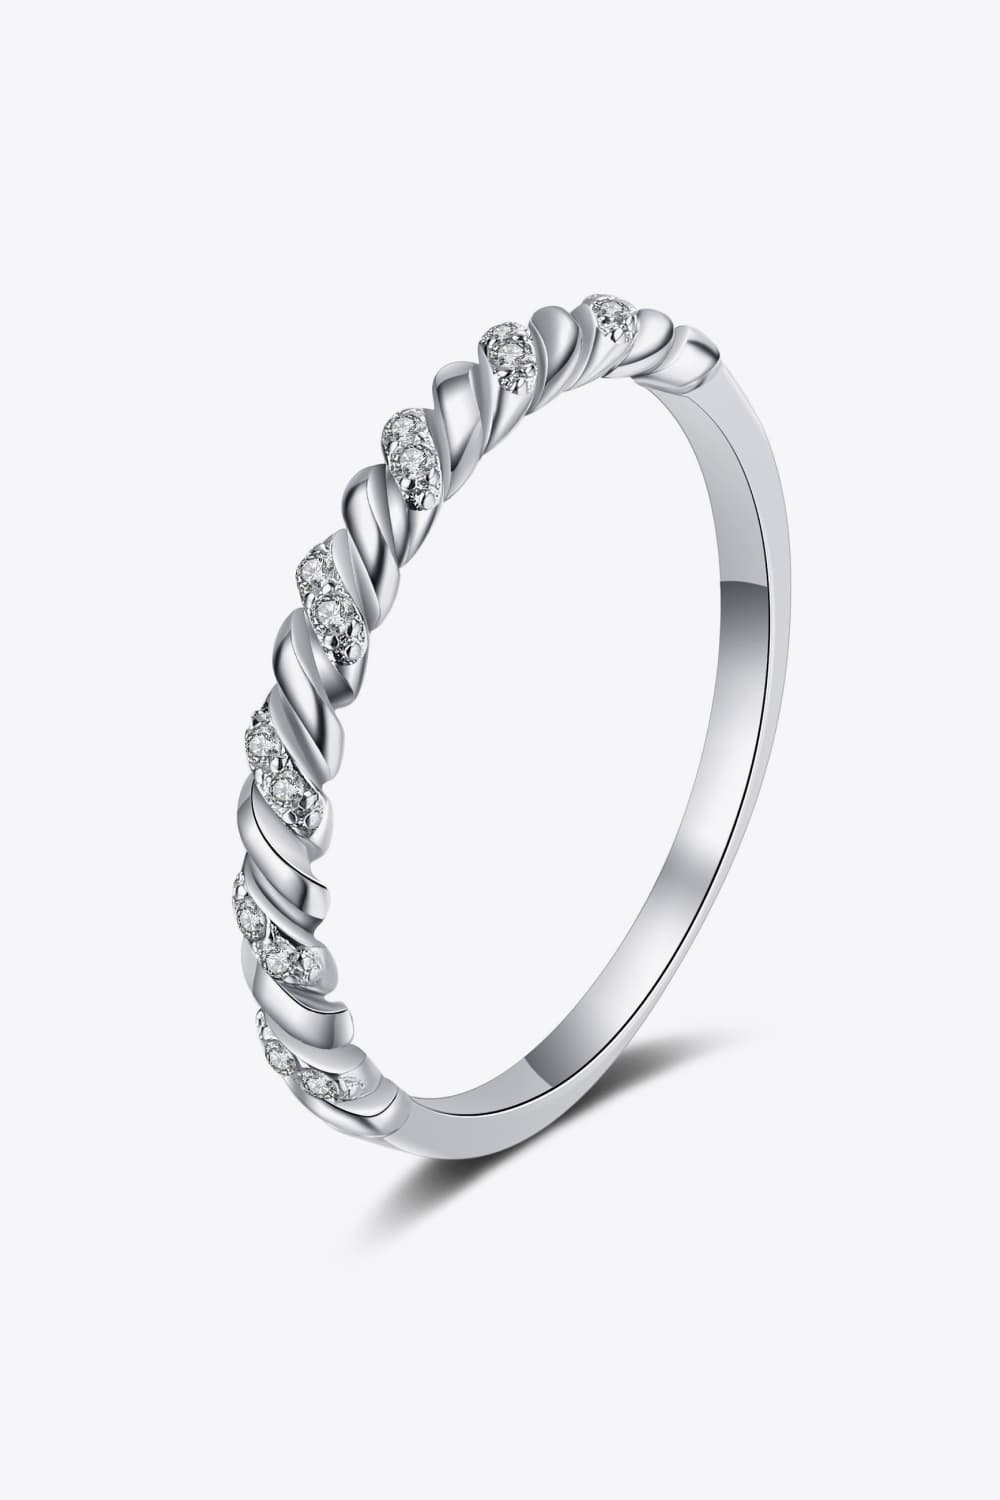 Moissanite 925 Sterling Silver - Rhodium-Plated Half-Eternity Ring - Sizes 4-10 Ti Amo I love you